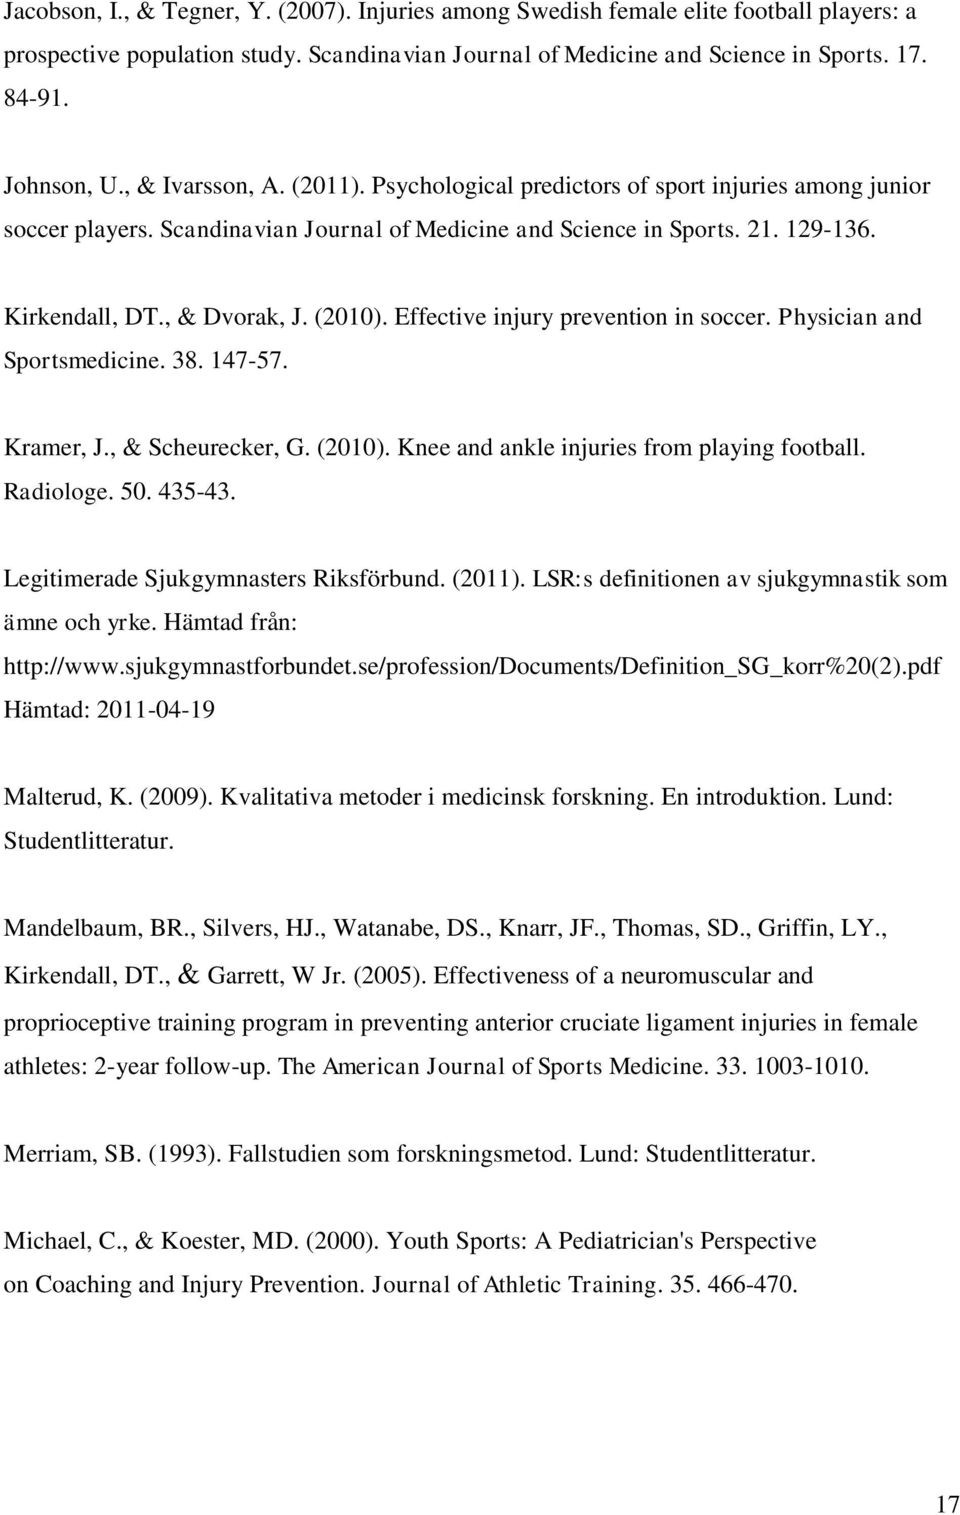 (2010). Effective injury prevention in soccer. Physician and Sportsmedicine. 38. 147-57. Kramer, J., & Scheurecker, G. (2010). Knee and ankle injuries from playing football. Radiologe. 50. 435-43.